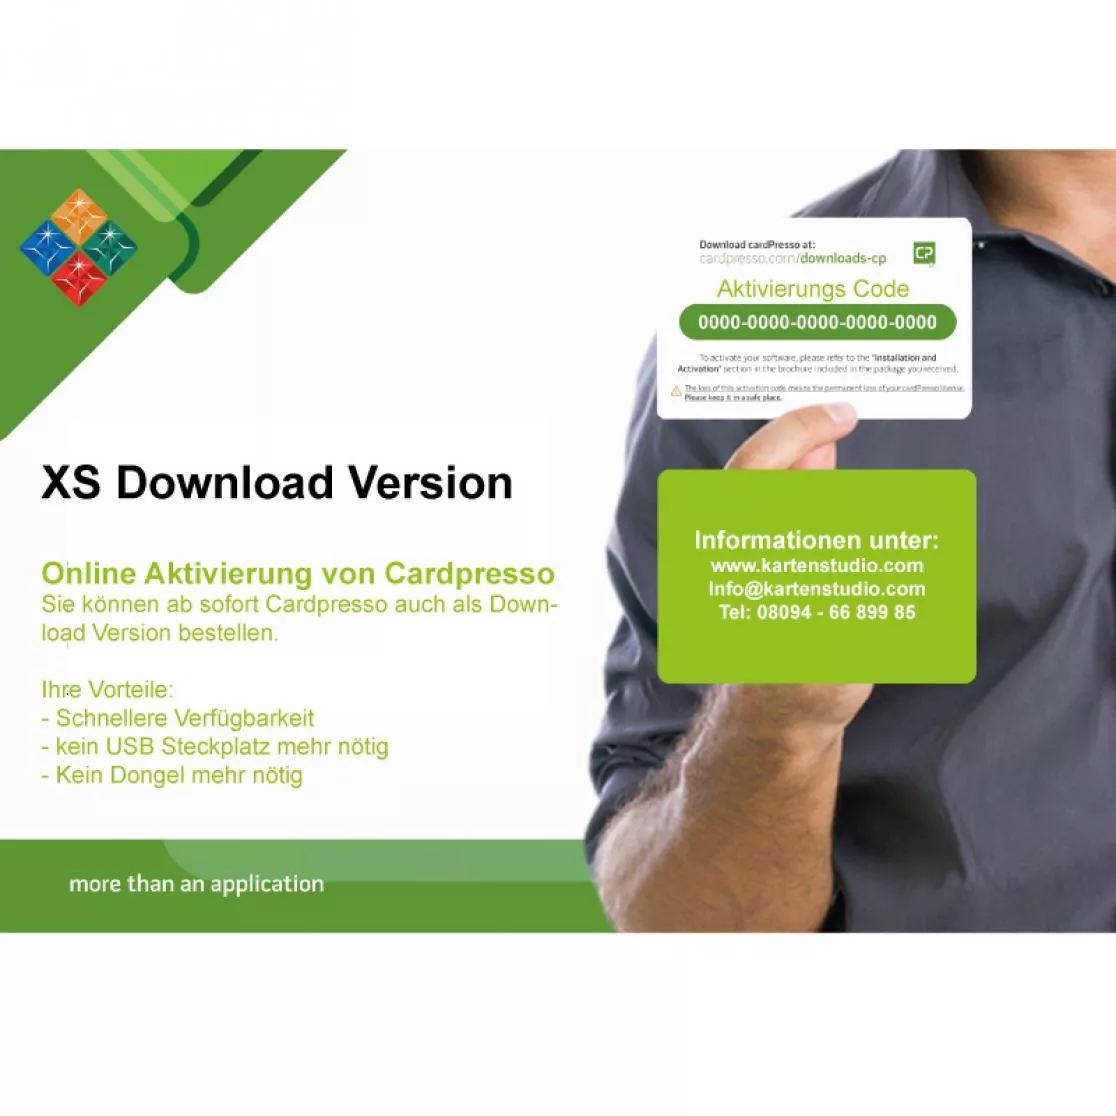 Cardpresso Software XS for Download